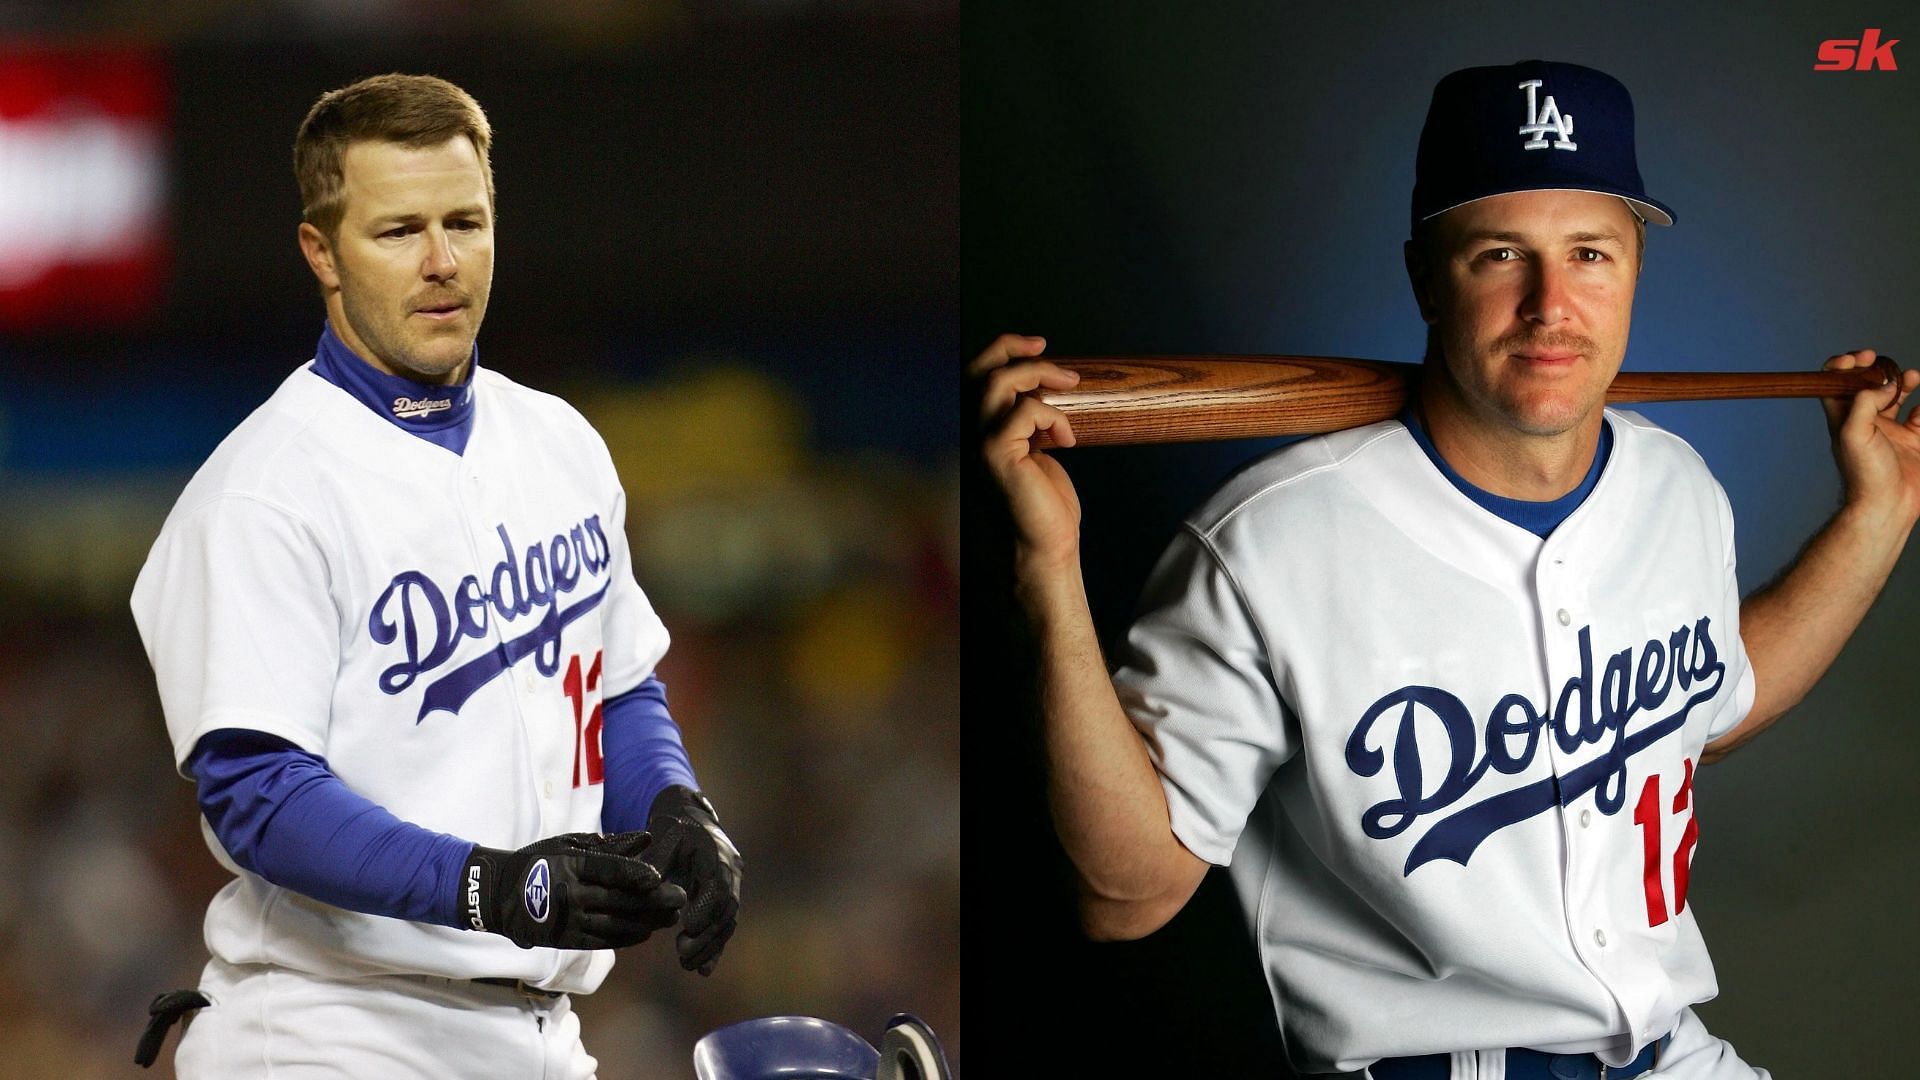 When Jeff Kent's endorsement of a campaign to ban homosexual marriage  sparked outrage